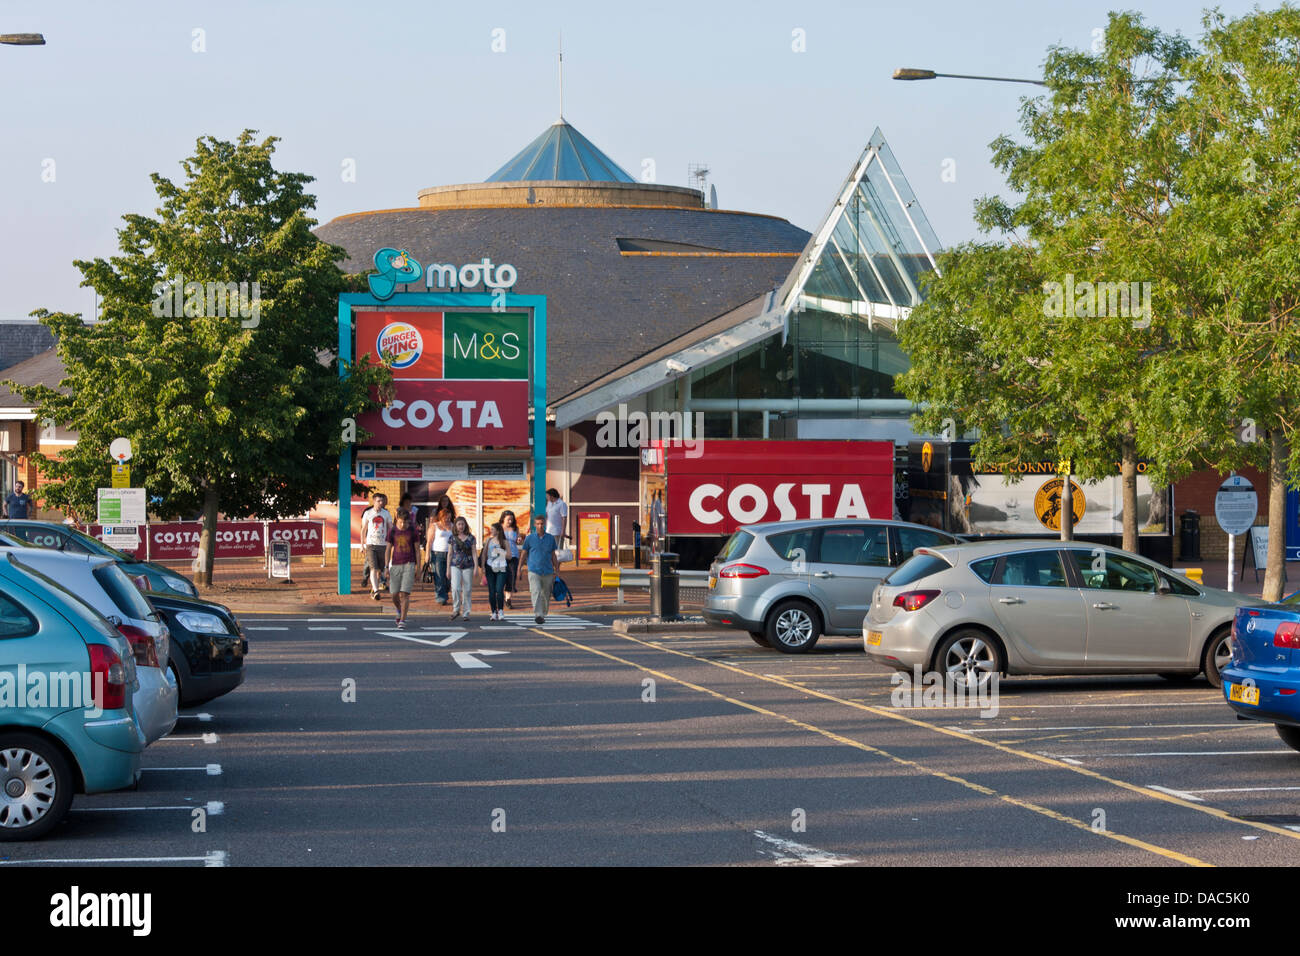 A Moto branded service station on the M4 motorway at Reading, Berkshire, England, GB, UK Stock Photo